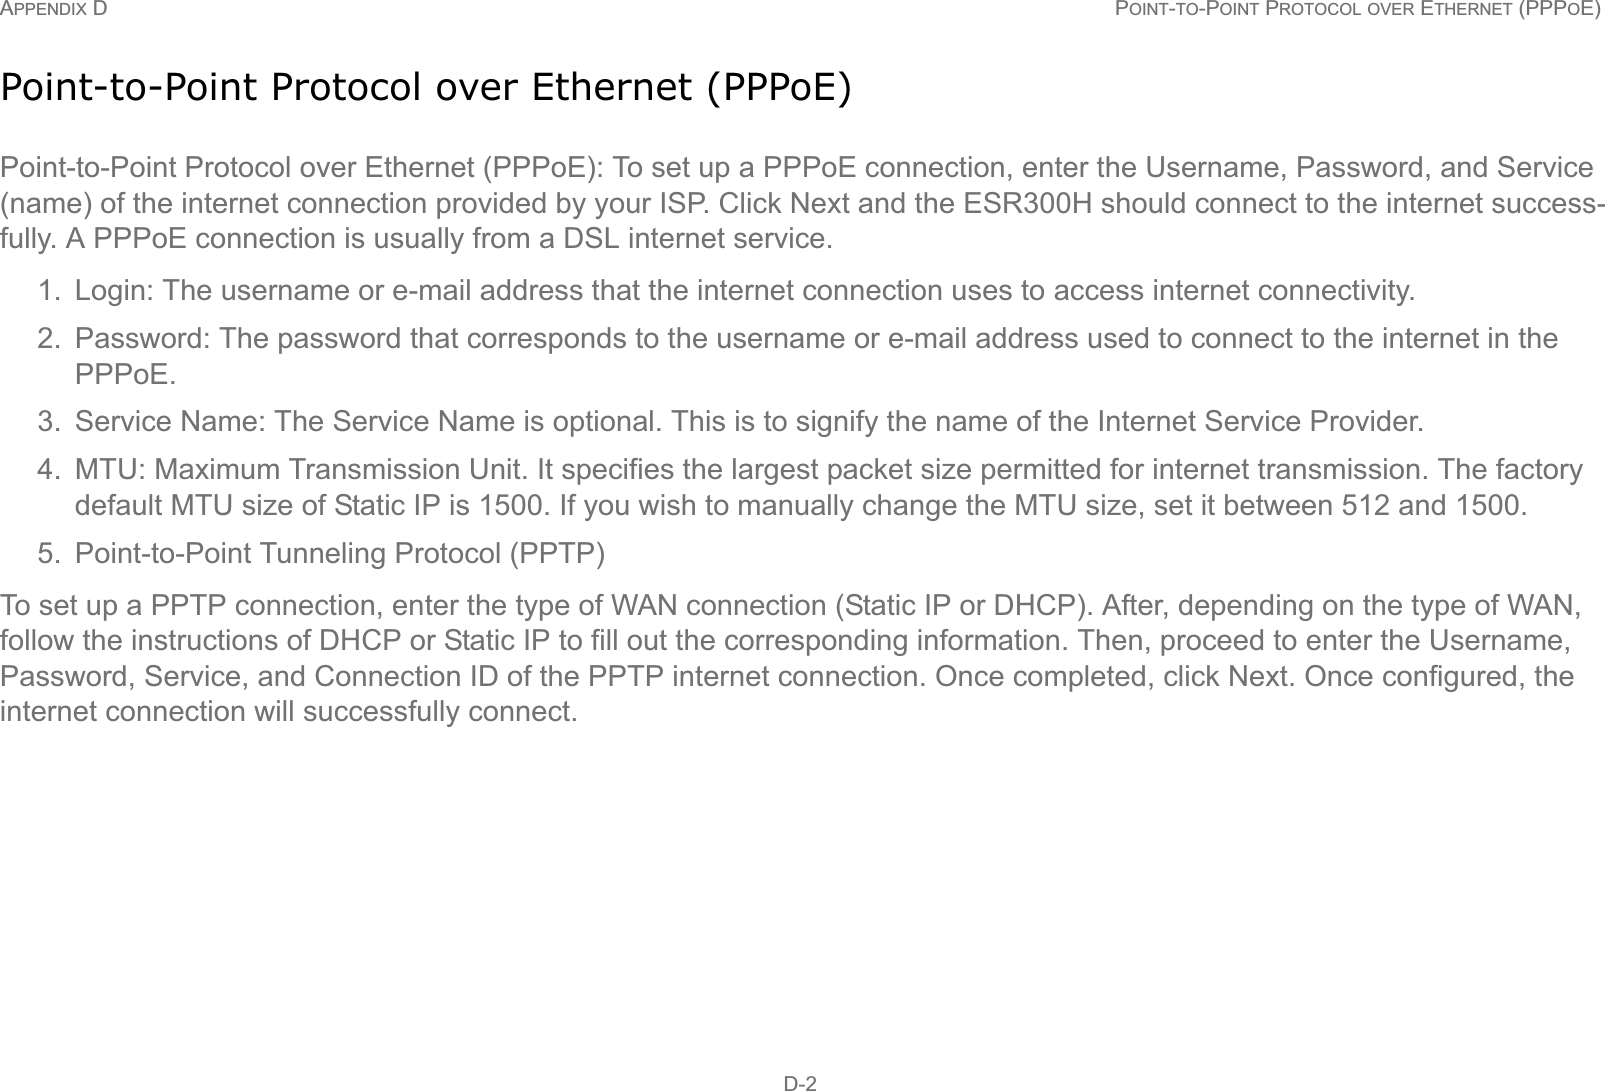 APPENDIX D POINT-TO-POINT PROTOCOL OVER ETHERNET (PPPOE) D-2Point-to-Point Protocol over Ethernet (PPPoE)Point-to-Point Protocol over Ethernet (PPPoE): To set up a PPPoE connection, enter the Username, Password, and Service (name) of the internet connection provided by your ISP. Click Next and the ESR300H should connect to the internet success-fully. A PPPoE connection is usually from a DSL internet service.1. Login: The username or e-mail address that the internet connection uses to access internet connectivity.2. Password: The password that corresponds to the username or e-mail address used to connect to the internet in the PPPoE.3. Service Name: The Service Name is optional. This is to signify the name of the Internet Service Provider.4. MTU: Maximum Transmission Unit. It specifies the largest packet size permitted for internet transmission. The factory default MTU size of Static IP is 1500. If you wish to manually change the MTU size, set it between 512 and 1500. 5. Point-to-Point Tunneling Protocol (PPTP)To set up a PPTP connection, enter the type of WAN connection (Static IP or DHCP). After, depending on the type of WAN, follow the instructions of DHCP or Static IP to fill out the corresponding information. Then, proceed to enter the Username, Password, Service, and Connection ID of the PPTP internet connection. Once completed, click Next. Once configured, the internet connection will successfully connect.